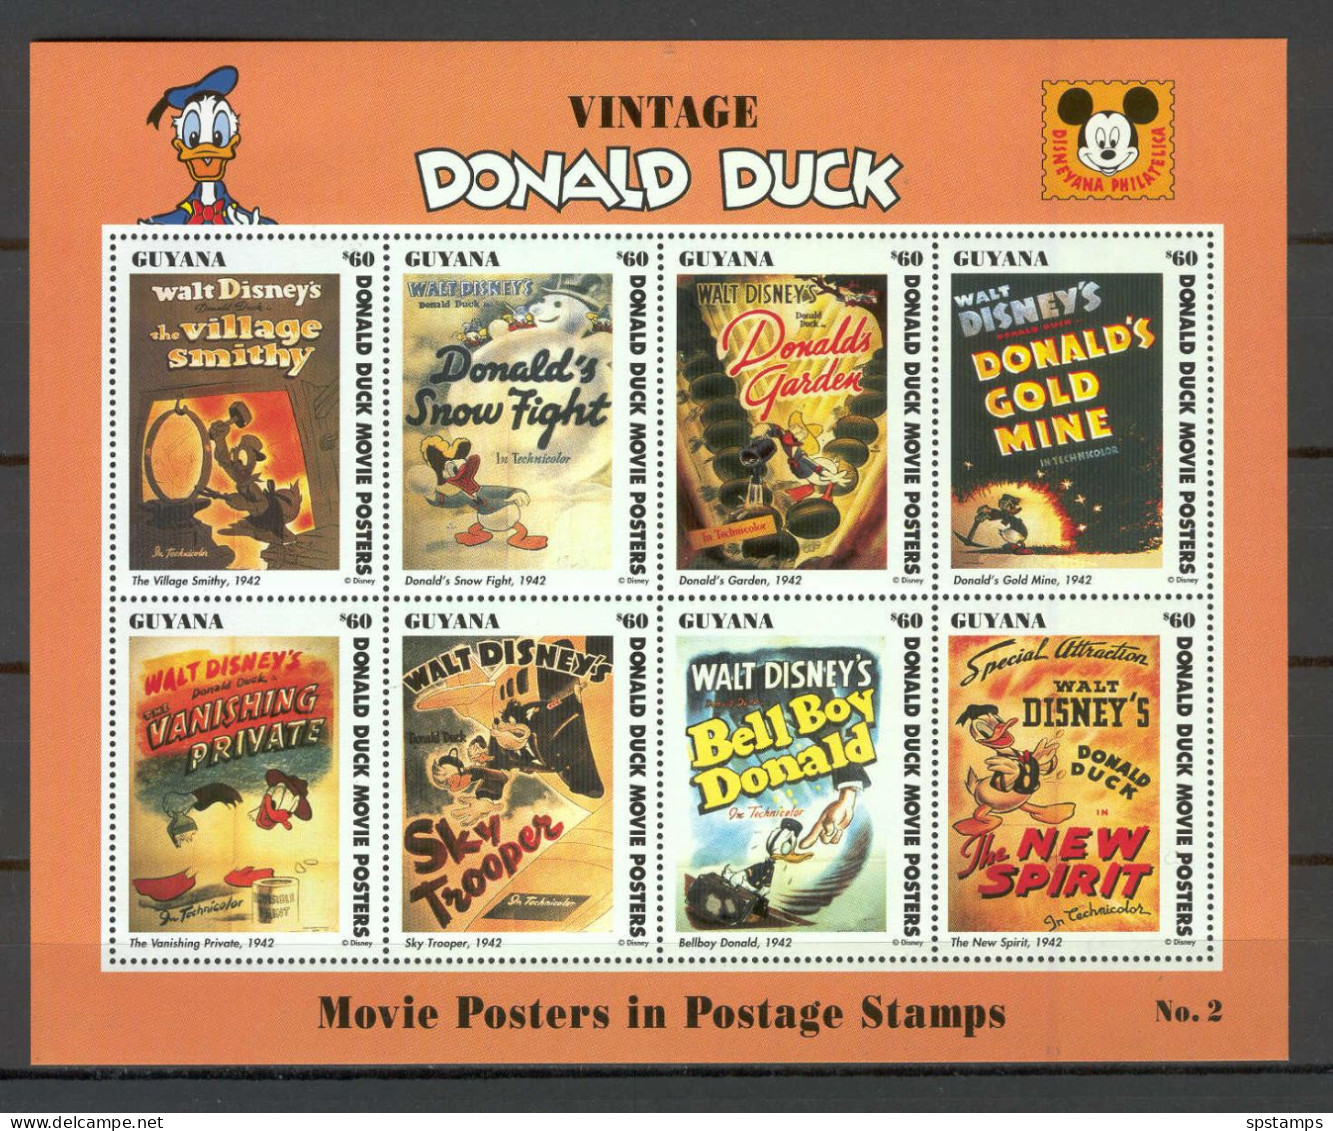 Disney Guyana 1993 Donald Duck - Movie Posters Sheetlet #2 (WITHOUT LABEL) MNH - Disney